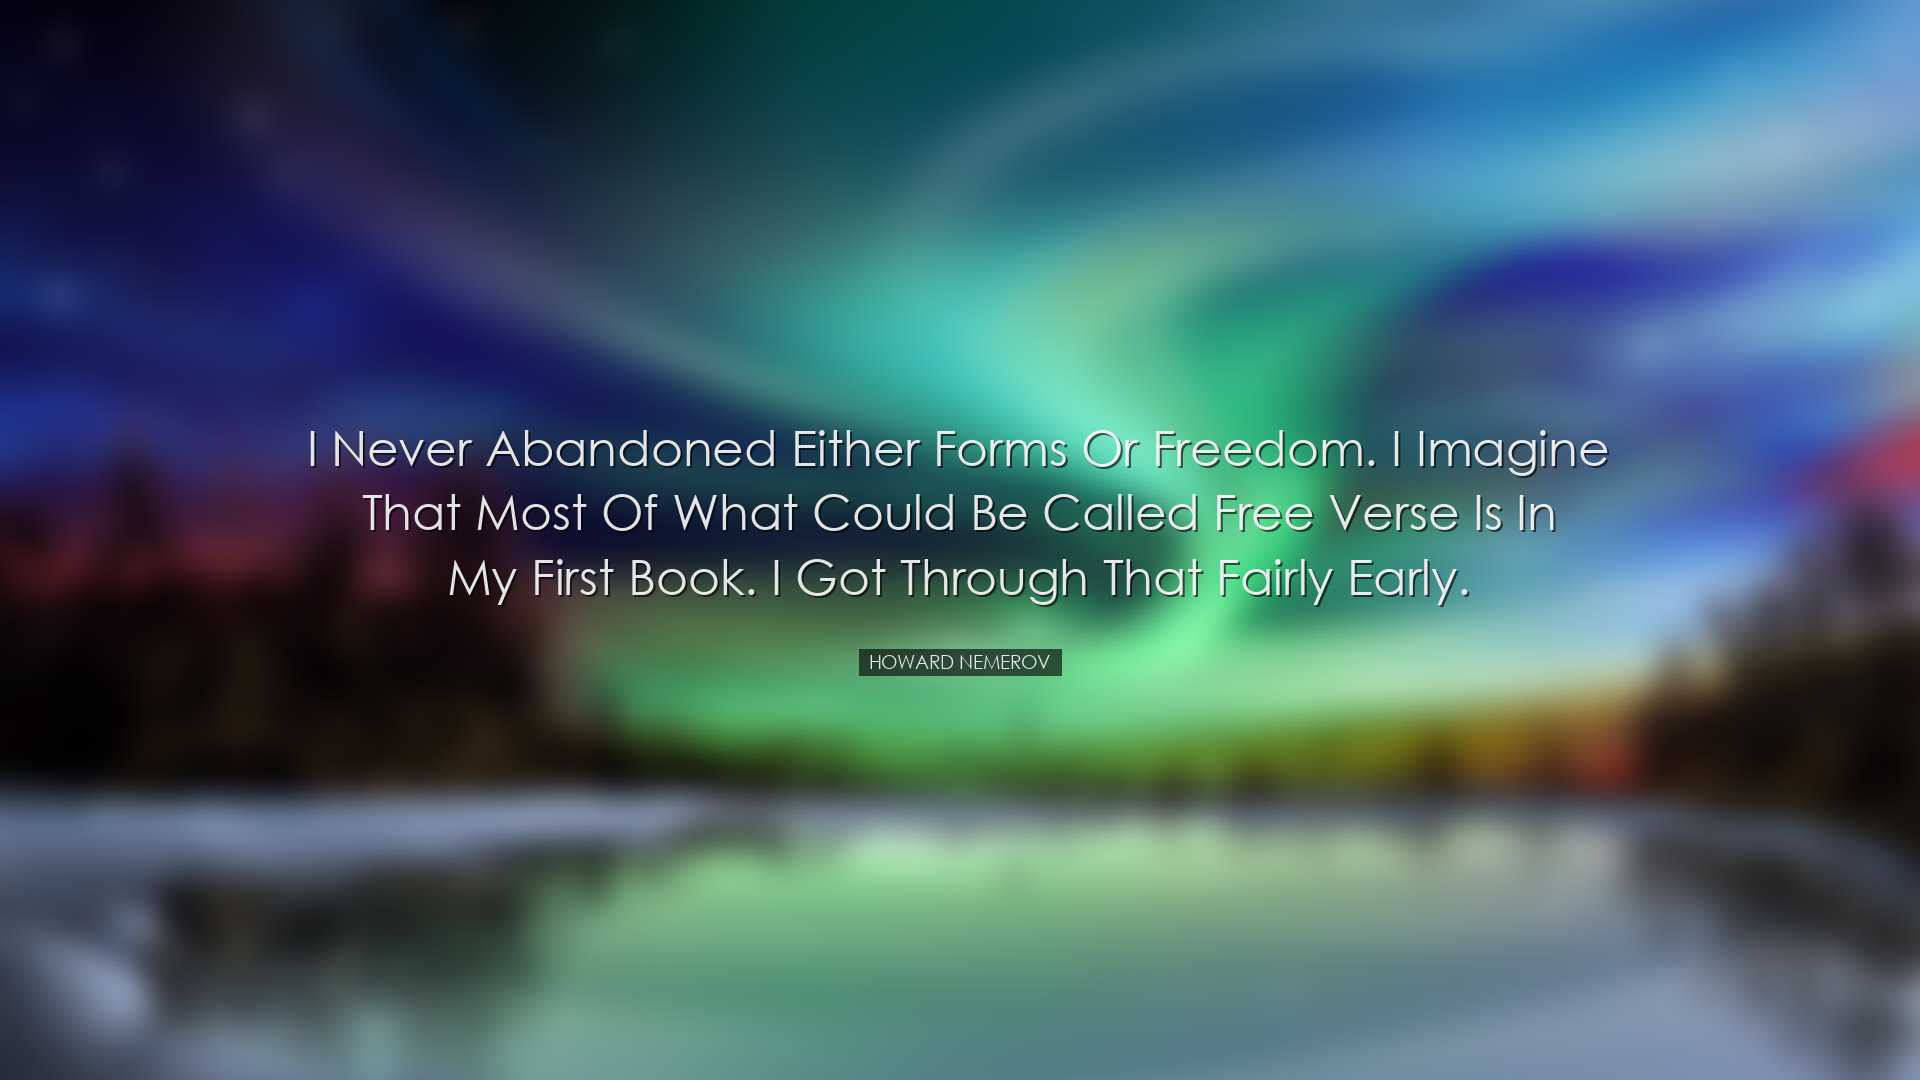 I never abandoned either forms or freedom. I imagine that most of